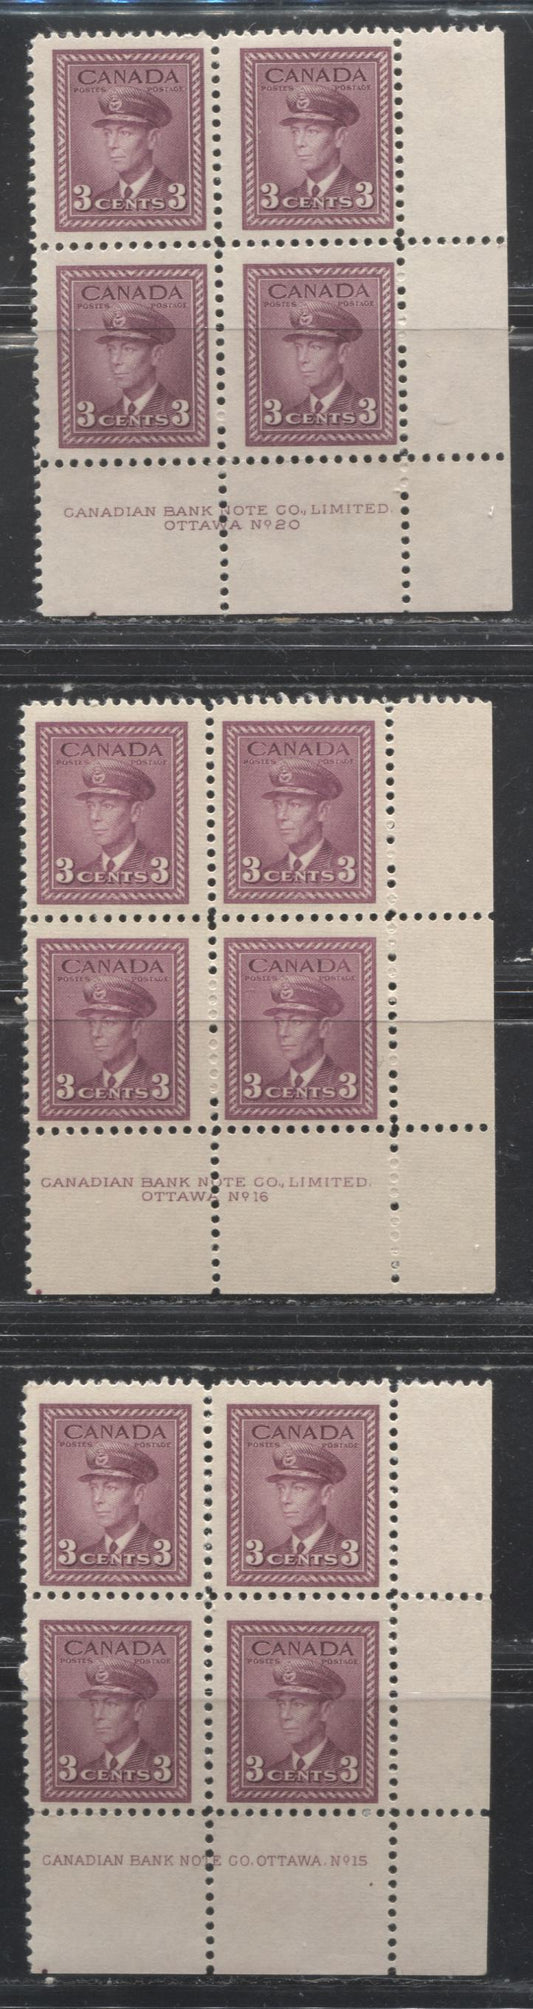 Lot 36 Canada #252 3c  Rosy Plum King George VI , 1942-1949 War Issue, Fine NH Plate 15, 16 & 20 Lower Right Blocks of 4 Plate Dot at LL